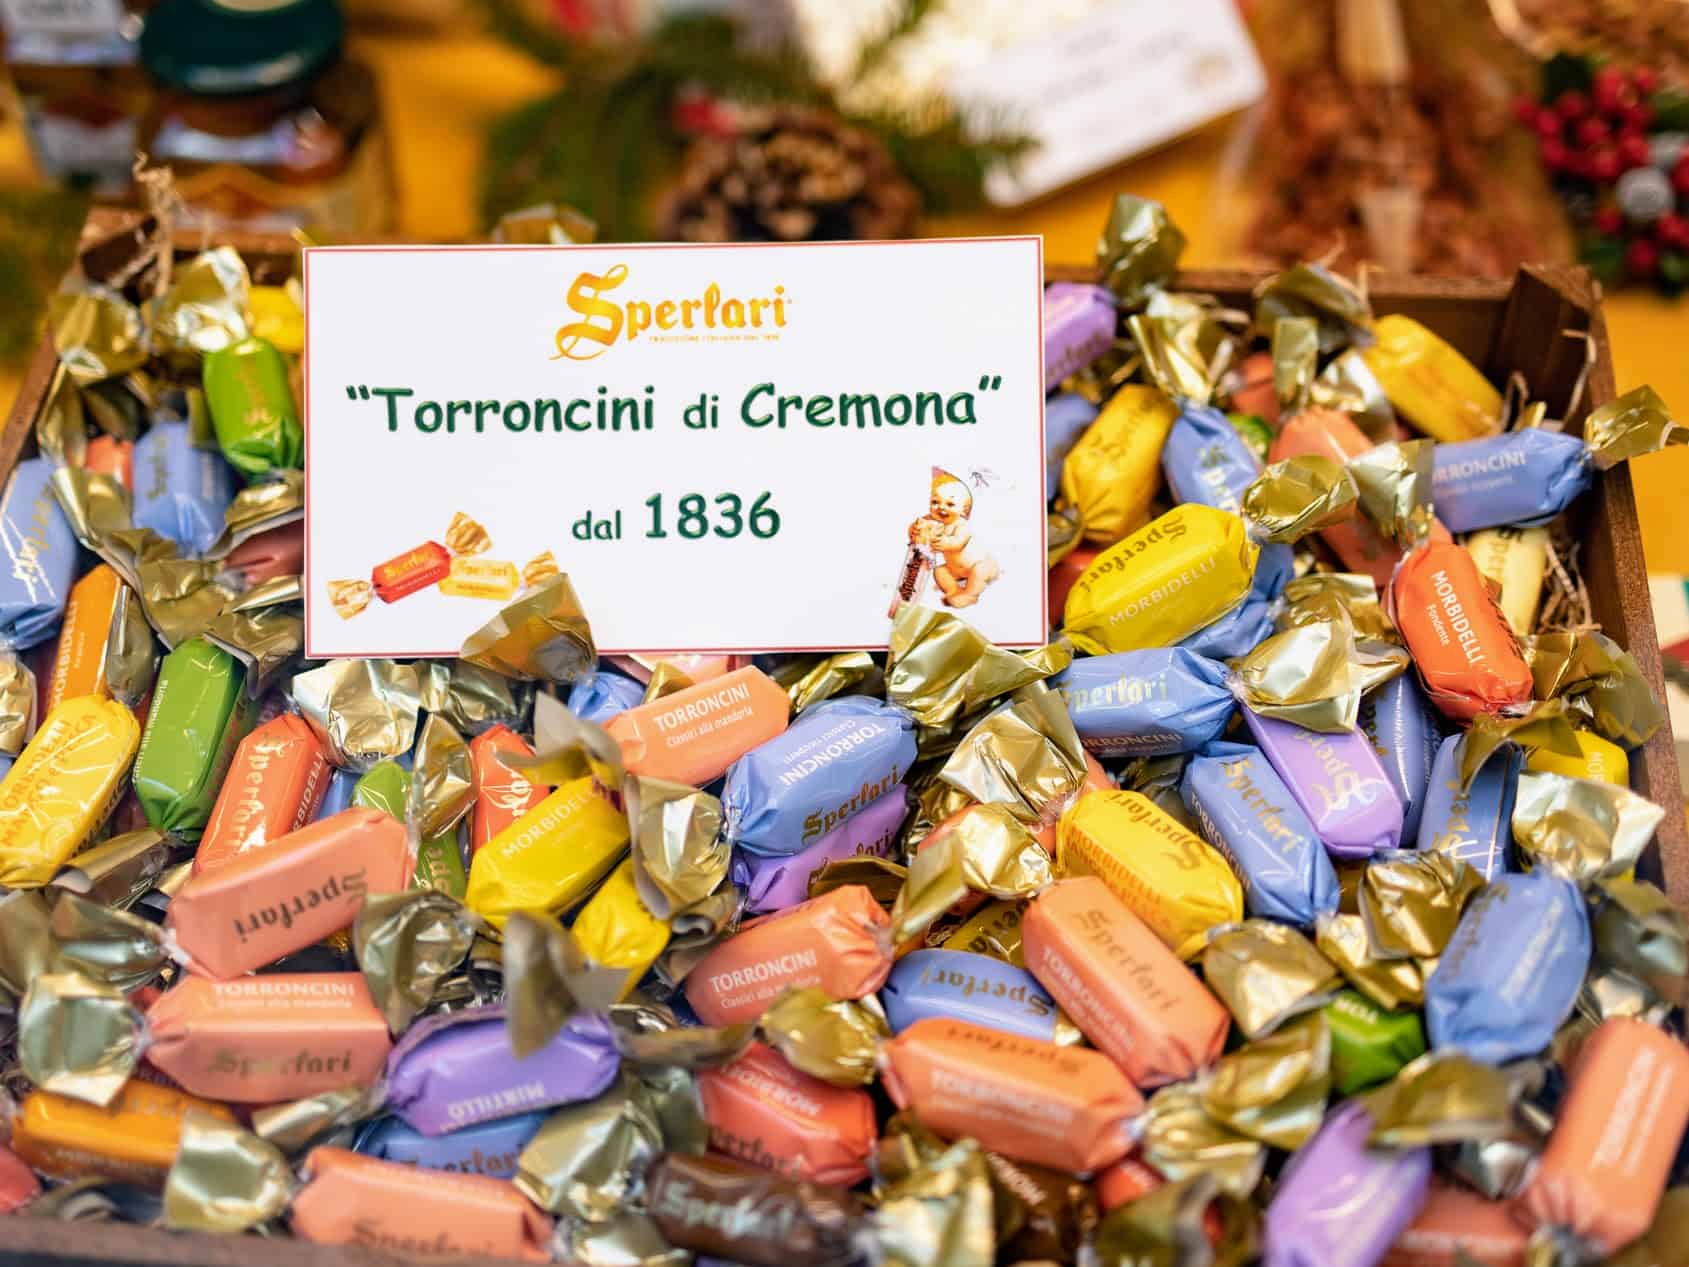 Close up of box of Sperlari candies for sale, one of Italy's most popular candy companies.